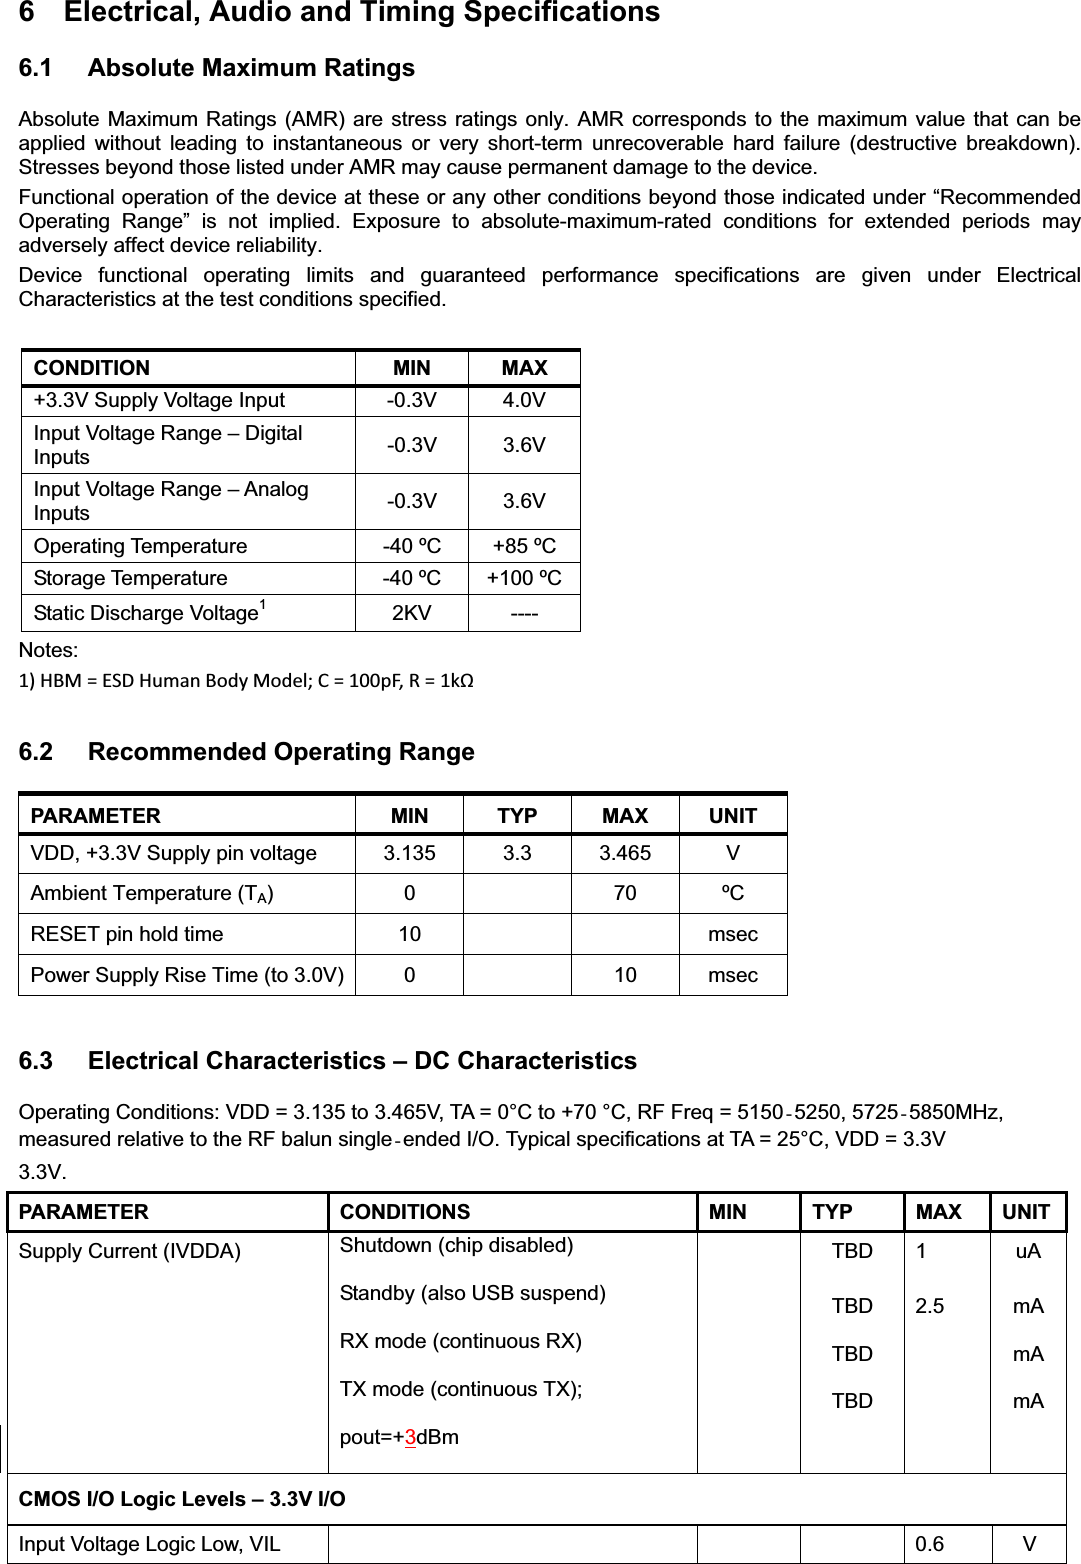 6  Electrical, Audio and Timing Specifications   6.1 Absolute Maximum Ratings Absolute Maximum Ratings (AMR) are stress ratings only. AMR corresponds to the maximum value that can be applied without leading to instantaneous or very short-term unrecoverable hard failure (destructive breakdown). Stresses beyond those listed under AMR may cause permanent damage to the device. Functional operation of the device at these or any other conditions beyond those indicated under “Recommended Operating Range” is not implied. Exposure to absolute-maximum-rated conditions for extended periods may adversely affect device reliability. Device functional operating limits and guaranteed performance specifications are given under Electrical Characteristics at the test conditions specified.   CONDITION MIN MAX +3.3V Supply Voltage Input  -0.3V  4.0V Input Voltage Range – Digital Inputs  -0.3V 3.6V Input Voltage Range – Analog Inputs  -0.3V 3.6V Operating Temperature  -40 ºC  +85 ºC Storage Temperature  -40 ºC  +100 ºCStatic Discharge Voltage12KV ---- Notes: 1)HBM=ESDHumanBodyModel;C=100pF,R=1k6.2  Recommended Operating Range PARAMETER MIN TYP MAX UNIT VDD, +3.3V Supply pin voltage    3.135  3.3  3.465  V Ambient Temperature (TA) 0  70 ºC RESET pin hold time  10      msec Power Supply Rise Time (to 3.0V)  0    10  msec 6.3  Electrical Characteristics – DC Characteristics Operating Conditions: VDD = 3.135 to 3.465V, TA = 0°C to +70 °C, RF Freq = 5150®5250, 5725®5850MHz, measured relative to the RF balun single®ended I/O. Typical specifications at TA = 25°C, VDD = 3.3V 3.3V.PARAMETER CONDITIONS  MIN TYP MAX UNITSupply Current (IVDDA)  Shutdown (chip disabled)   Standby (also USB suspend) RX mode (continuous RX) TX mode (continuous TX); pout=+3dBm TBD TBDTBDTBD12.5uAmAmAmACMOS I/O Logic Levels – 3.3V I/OInput Voltage Logic Low, VIL        0.6  V 